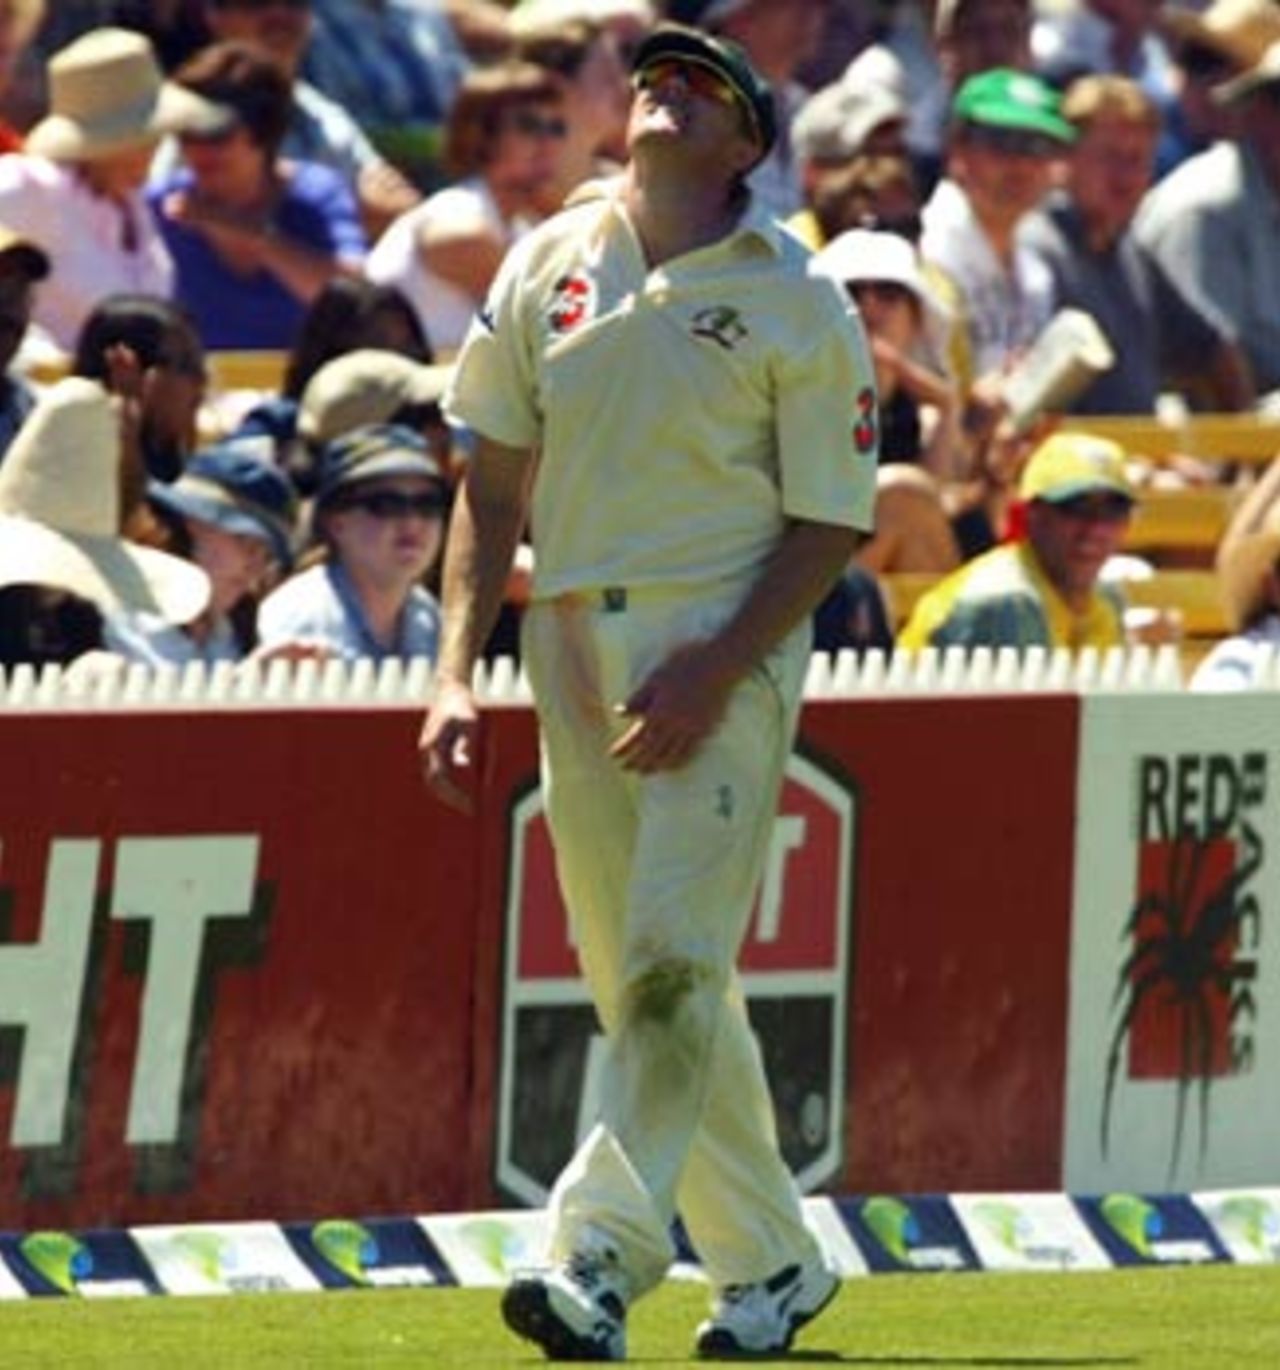 Things got worse for Australia as Williams injured his shoulder and left the field, Australia v India, 2nd Test, Adelaide, 3rd day, December 14, 2003